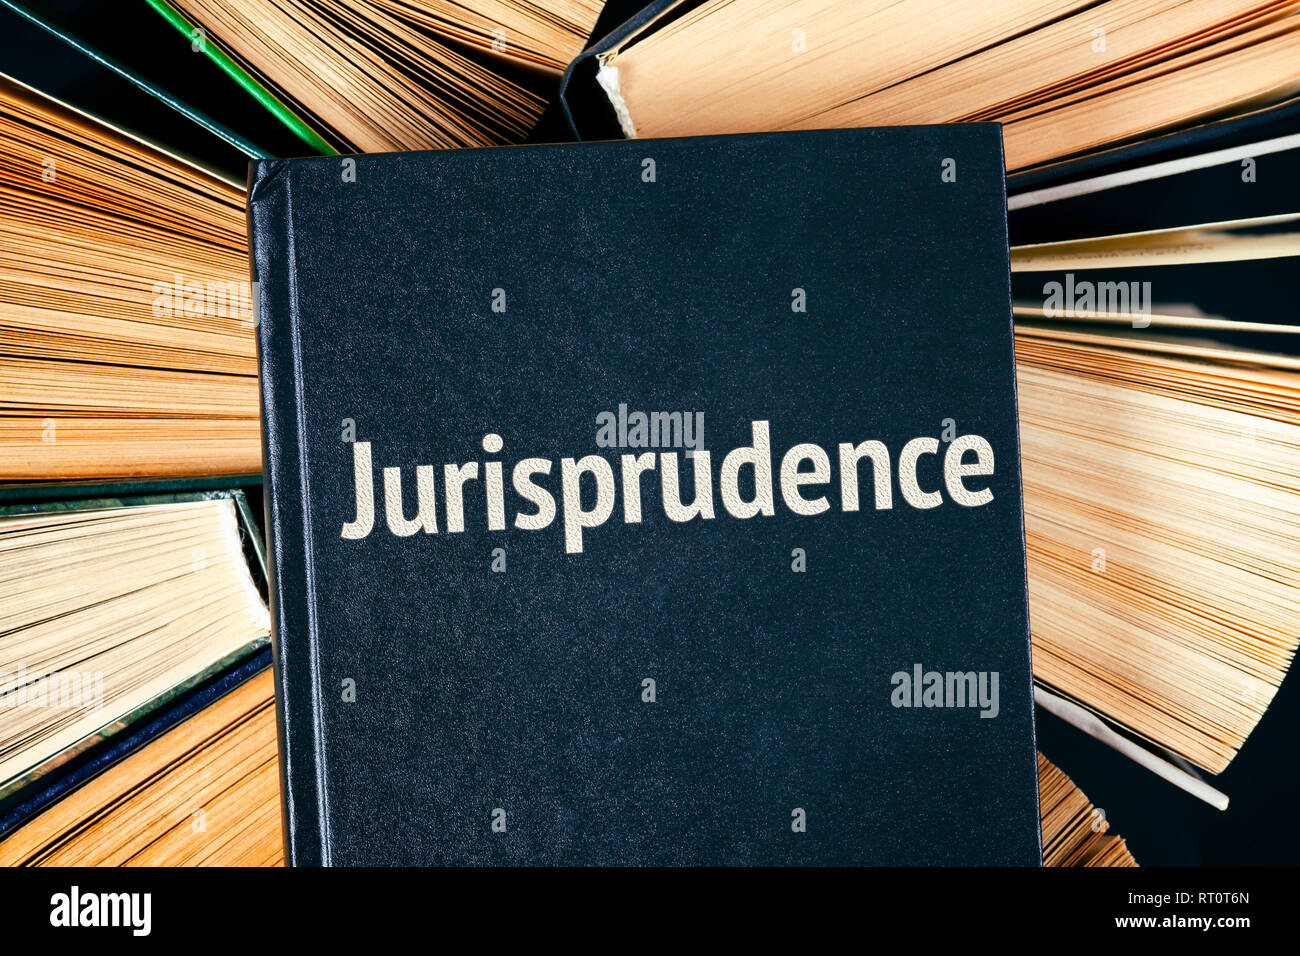 Top view of old hardcover books with book Jurisprudence on top. Stock Photo